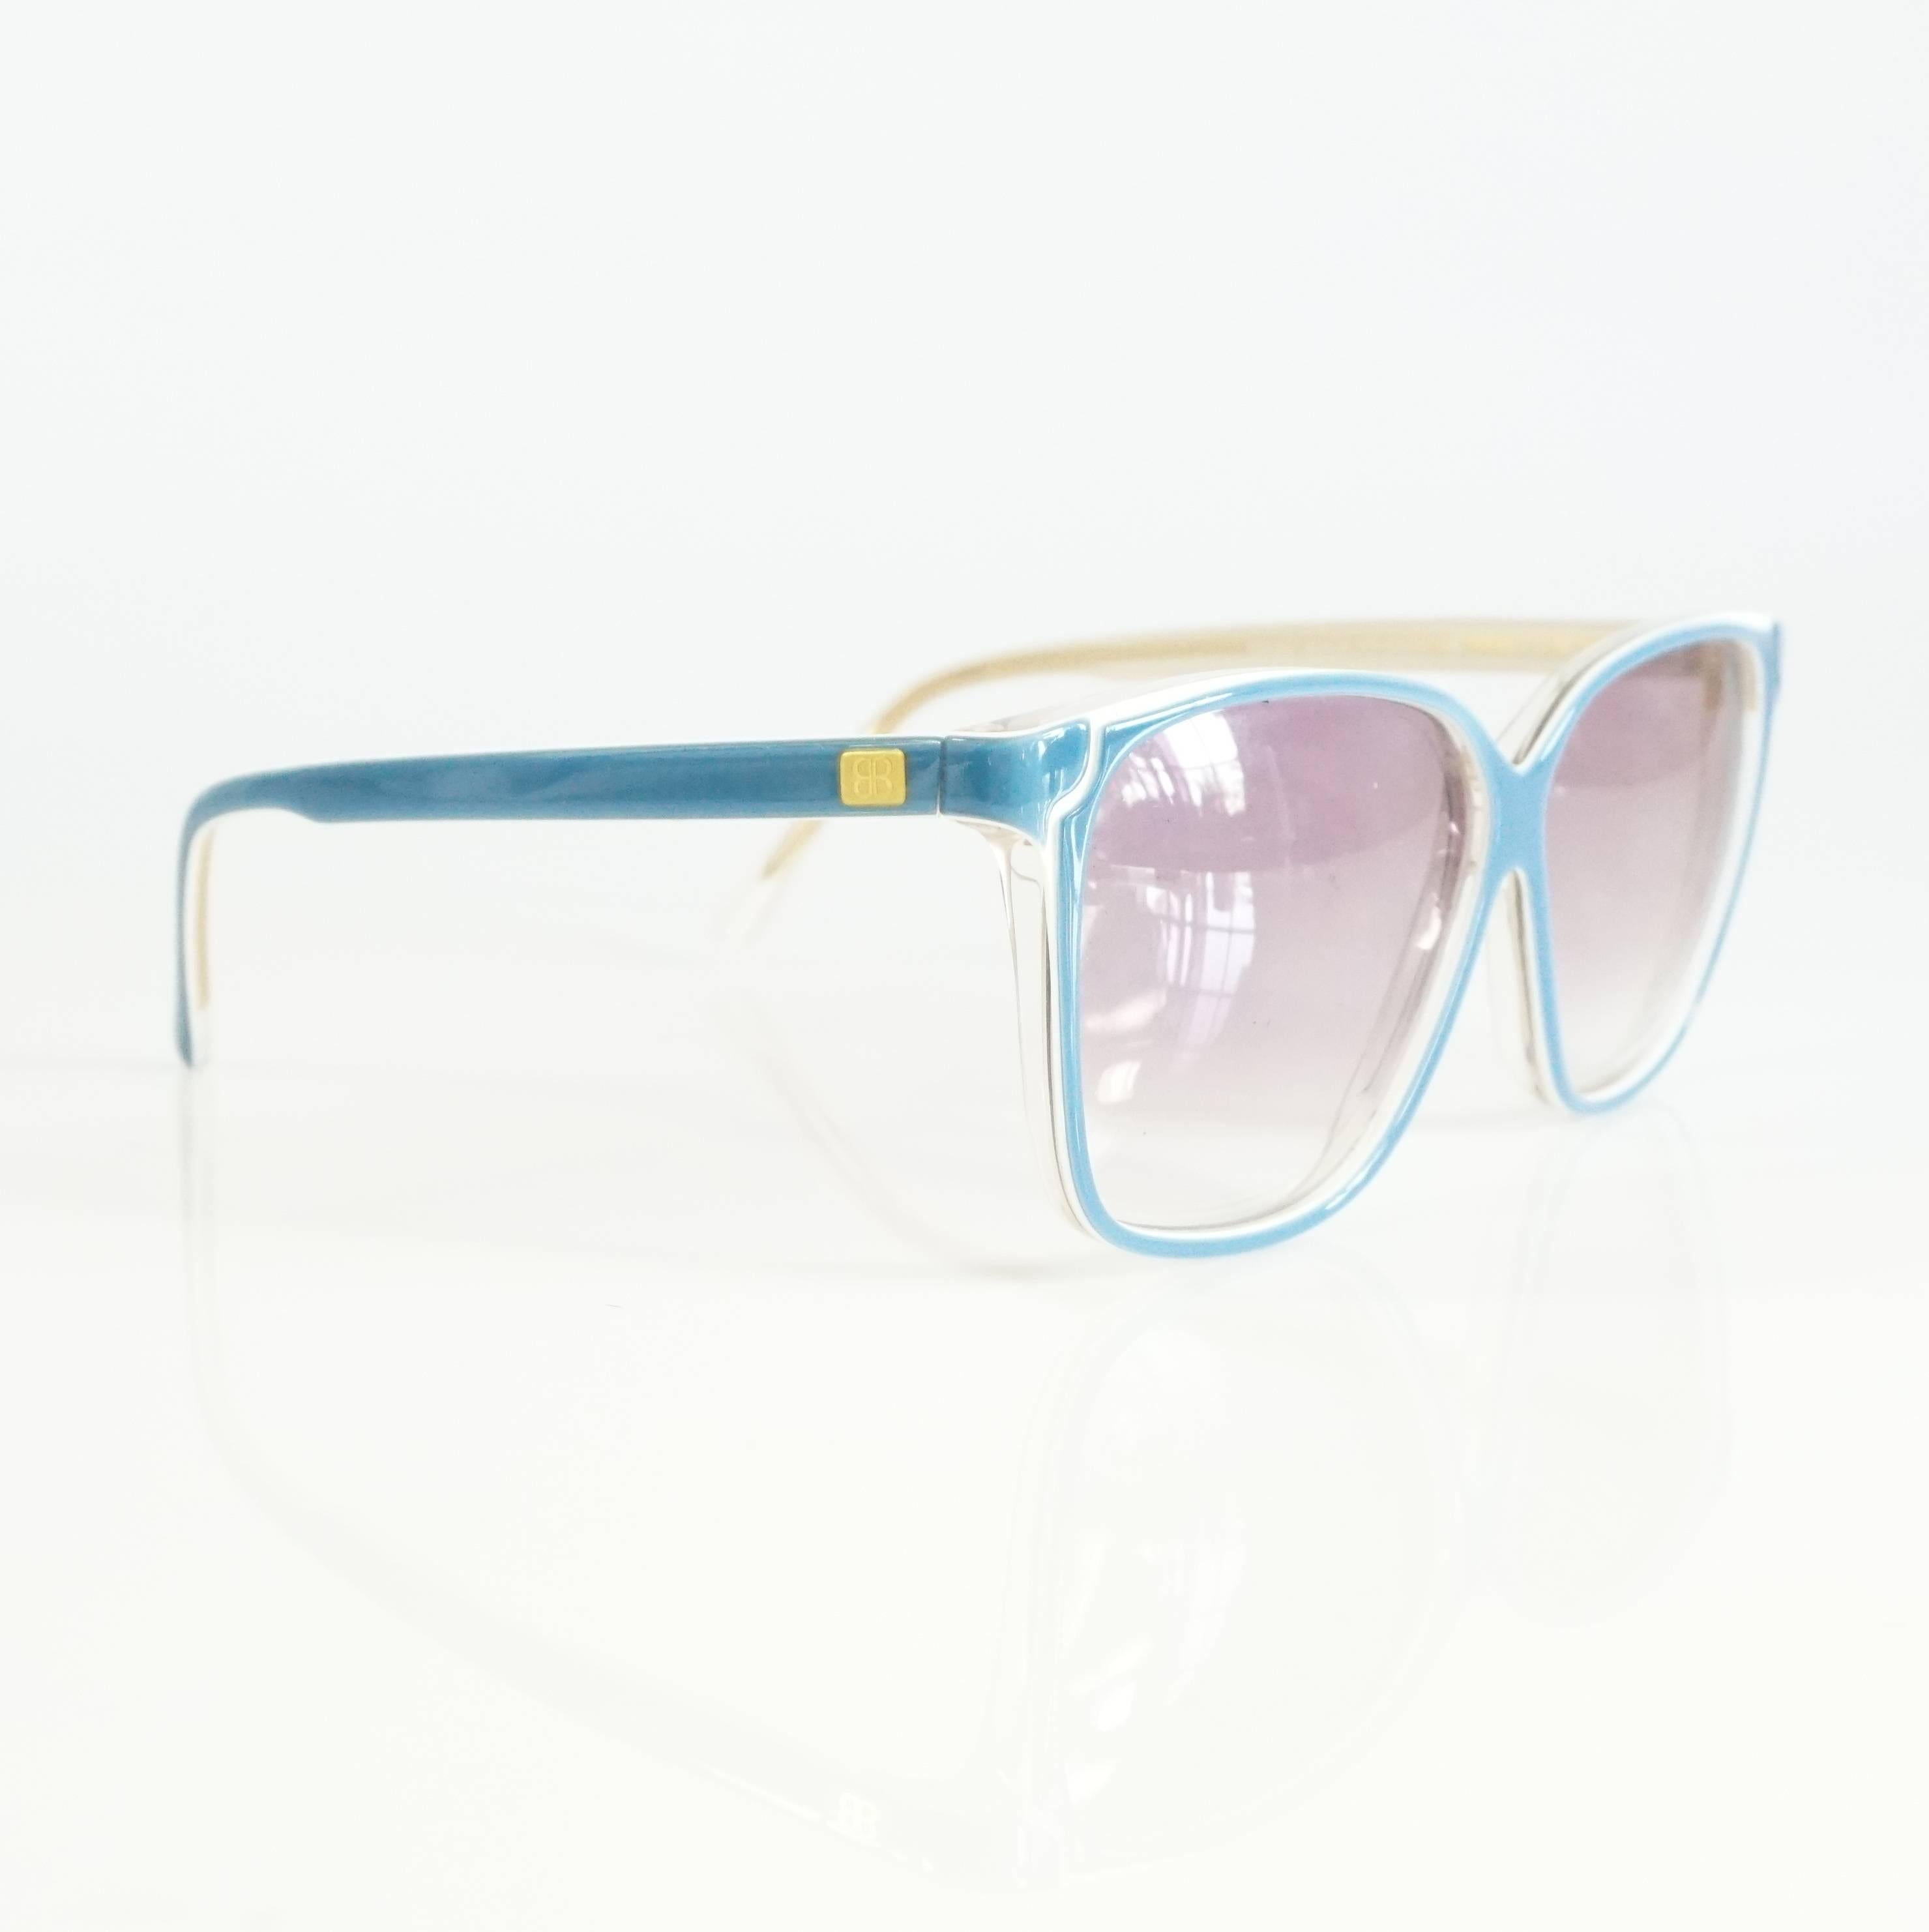 These vintage Balenciaga sunglasses have a blue and white square frame. These are in excellent condition. Circa 1980's. 

Measurements
Leg Length: 4.75"
Length (lens to lens): 5.5"
Lens Height: 2"
Lens Width: 2.5"